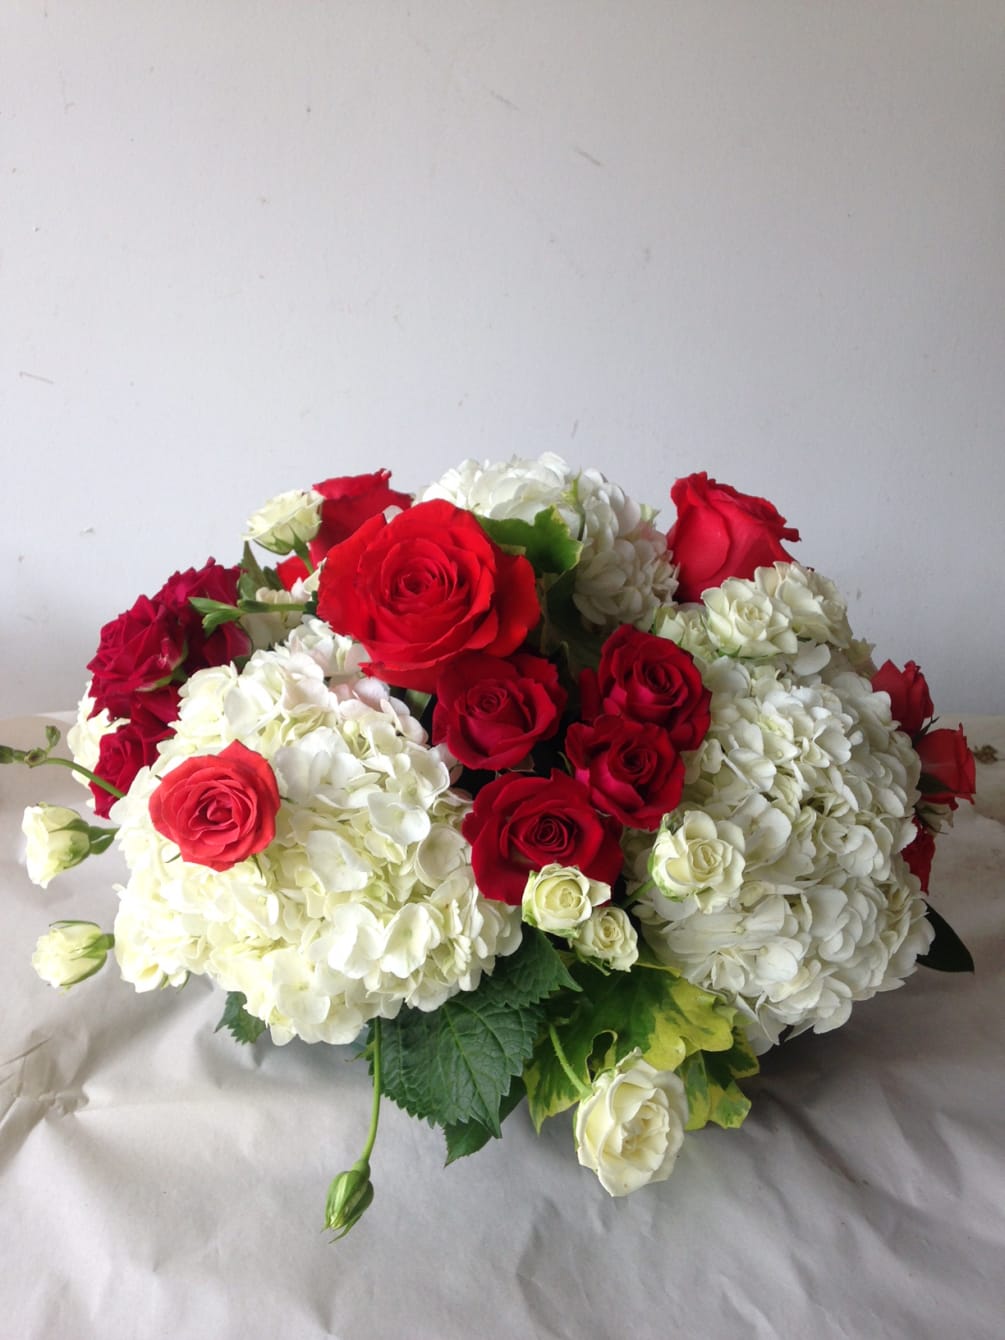 Fluffy white Hydrangeas with sweet red roses and touch of scented geranium